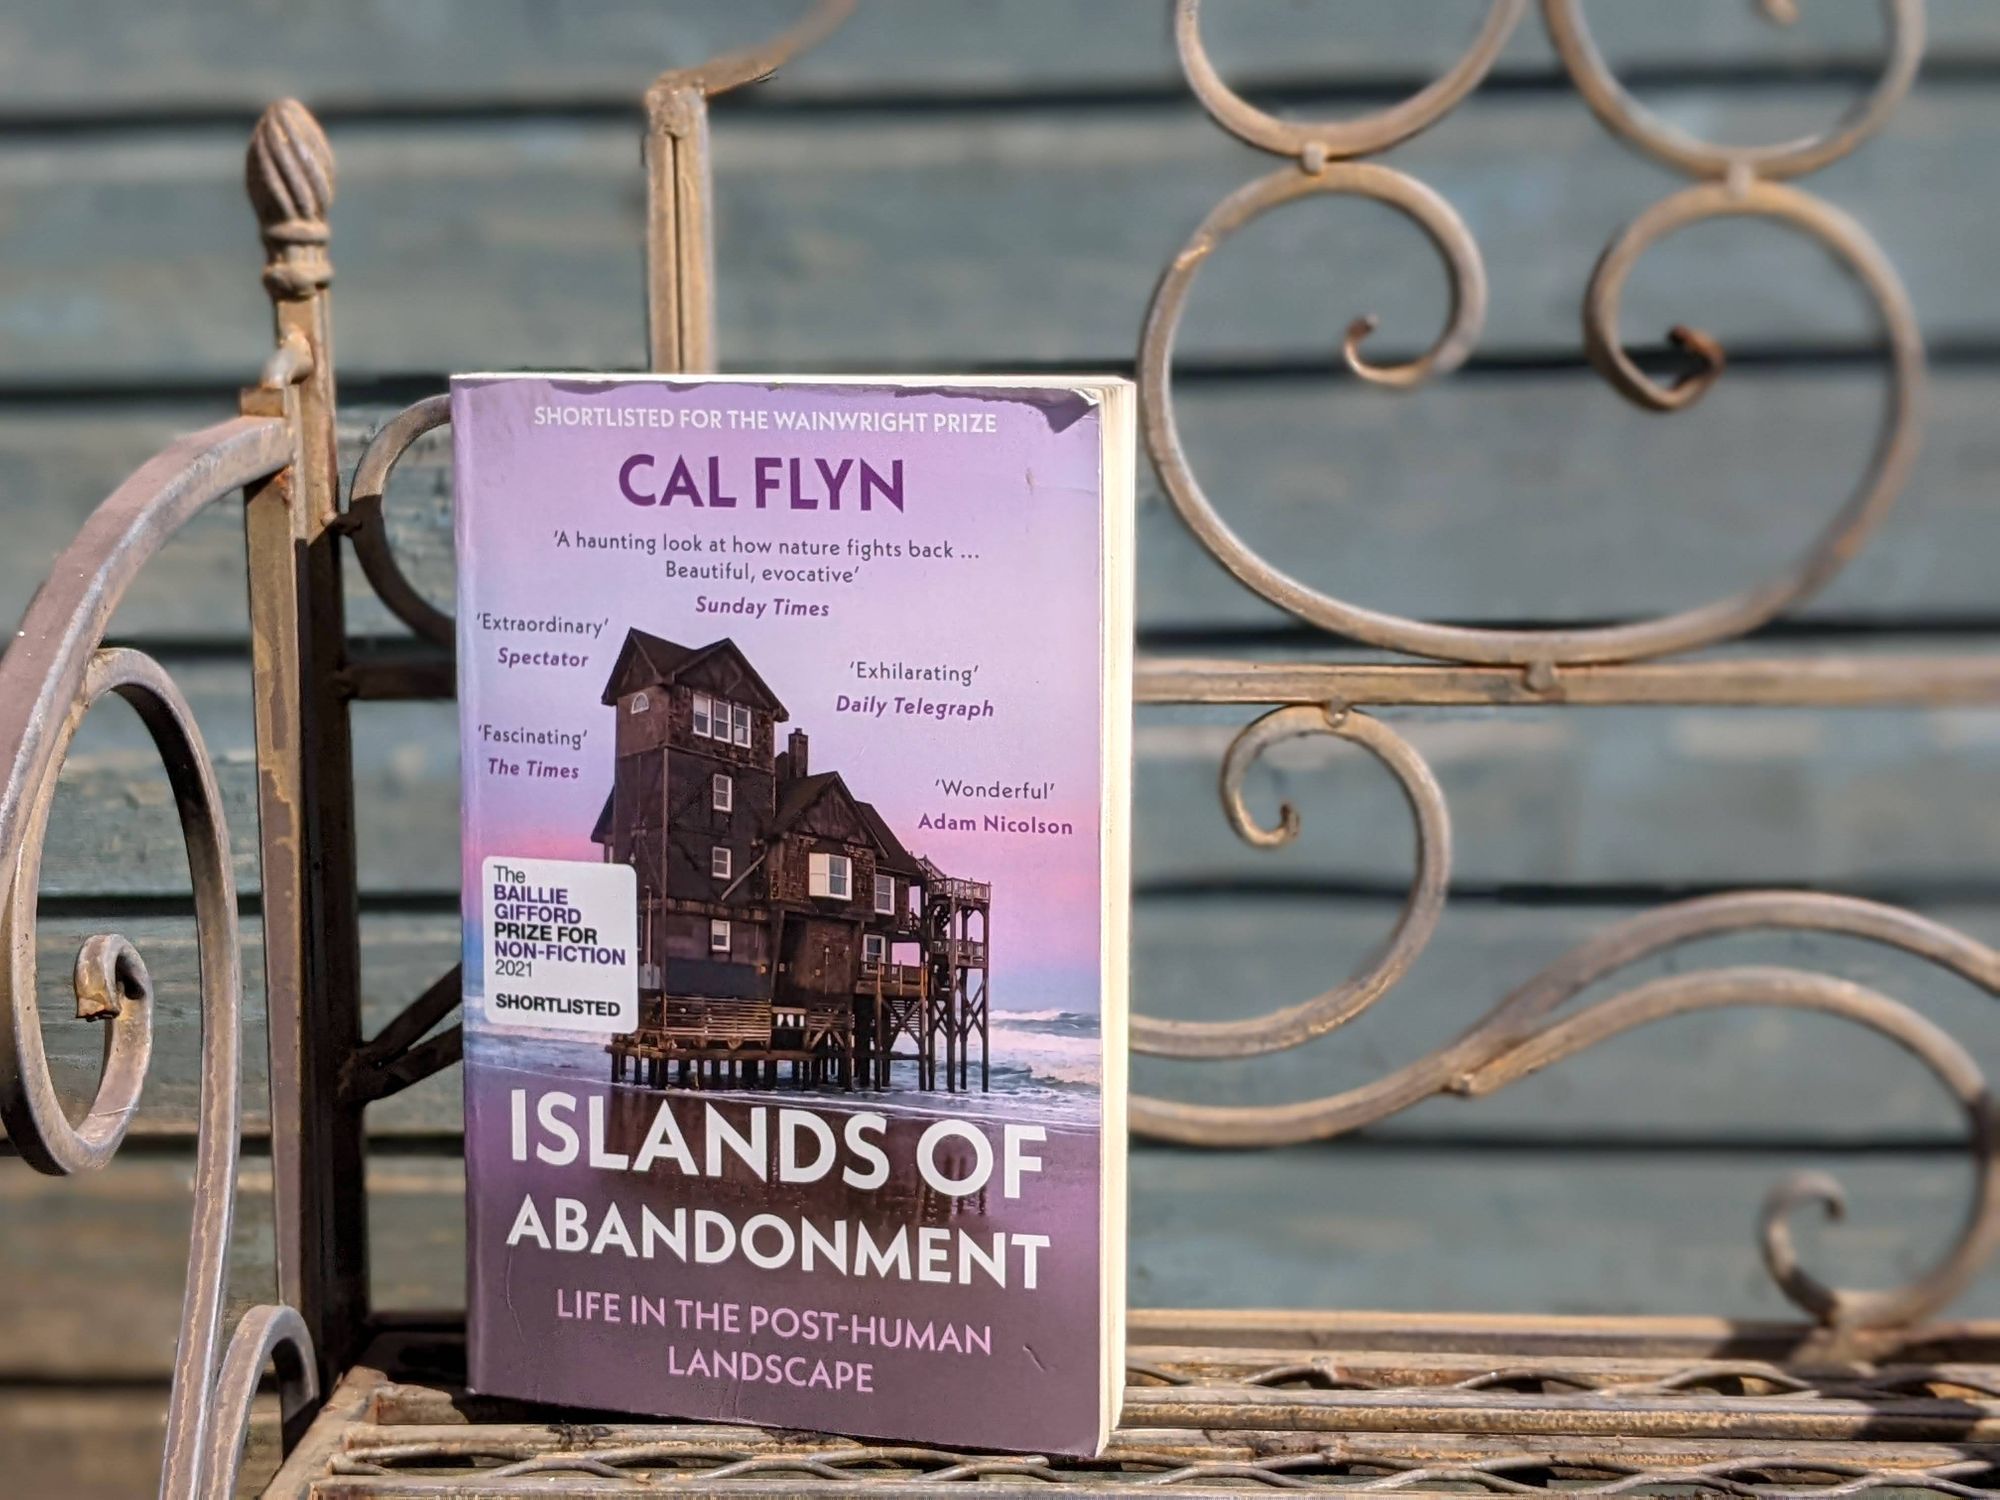 A book portrait of Islands of Abandonment by Cal Flyn.